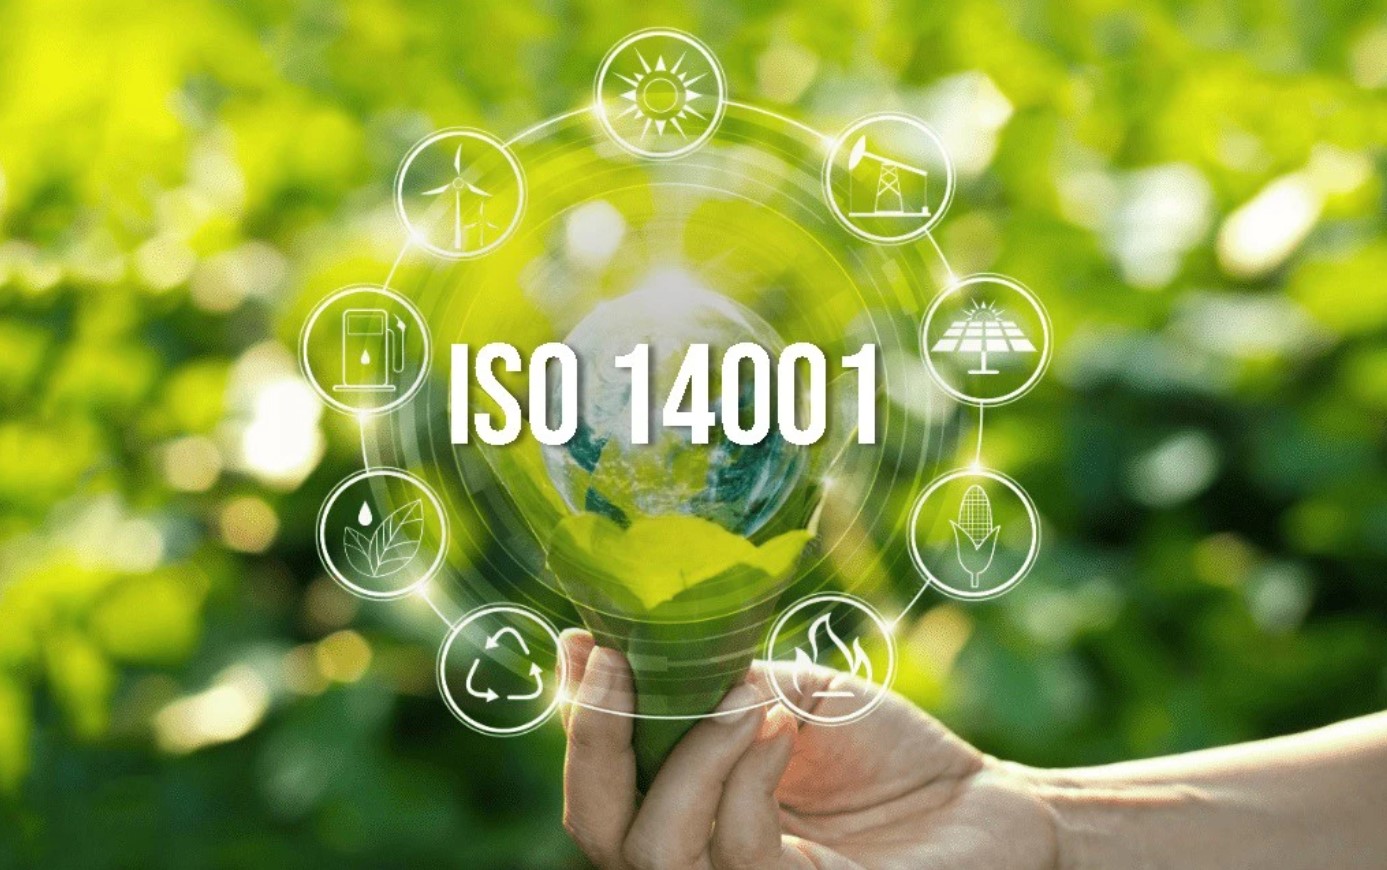 Amendment to ISO 14001 in the works